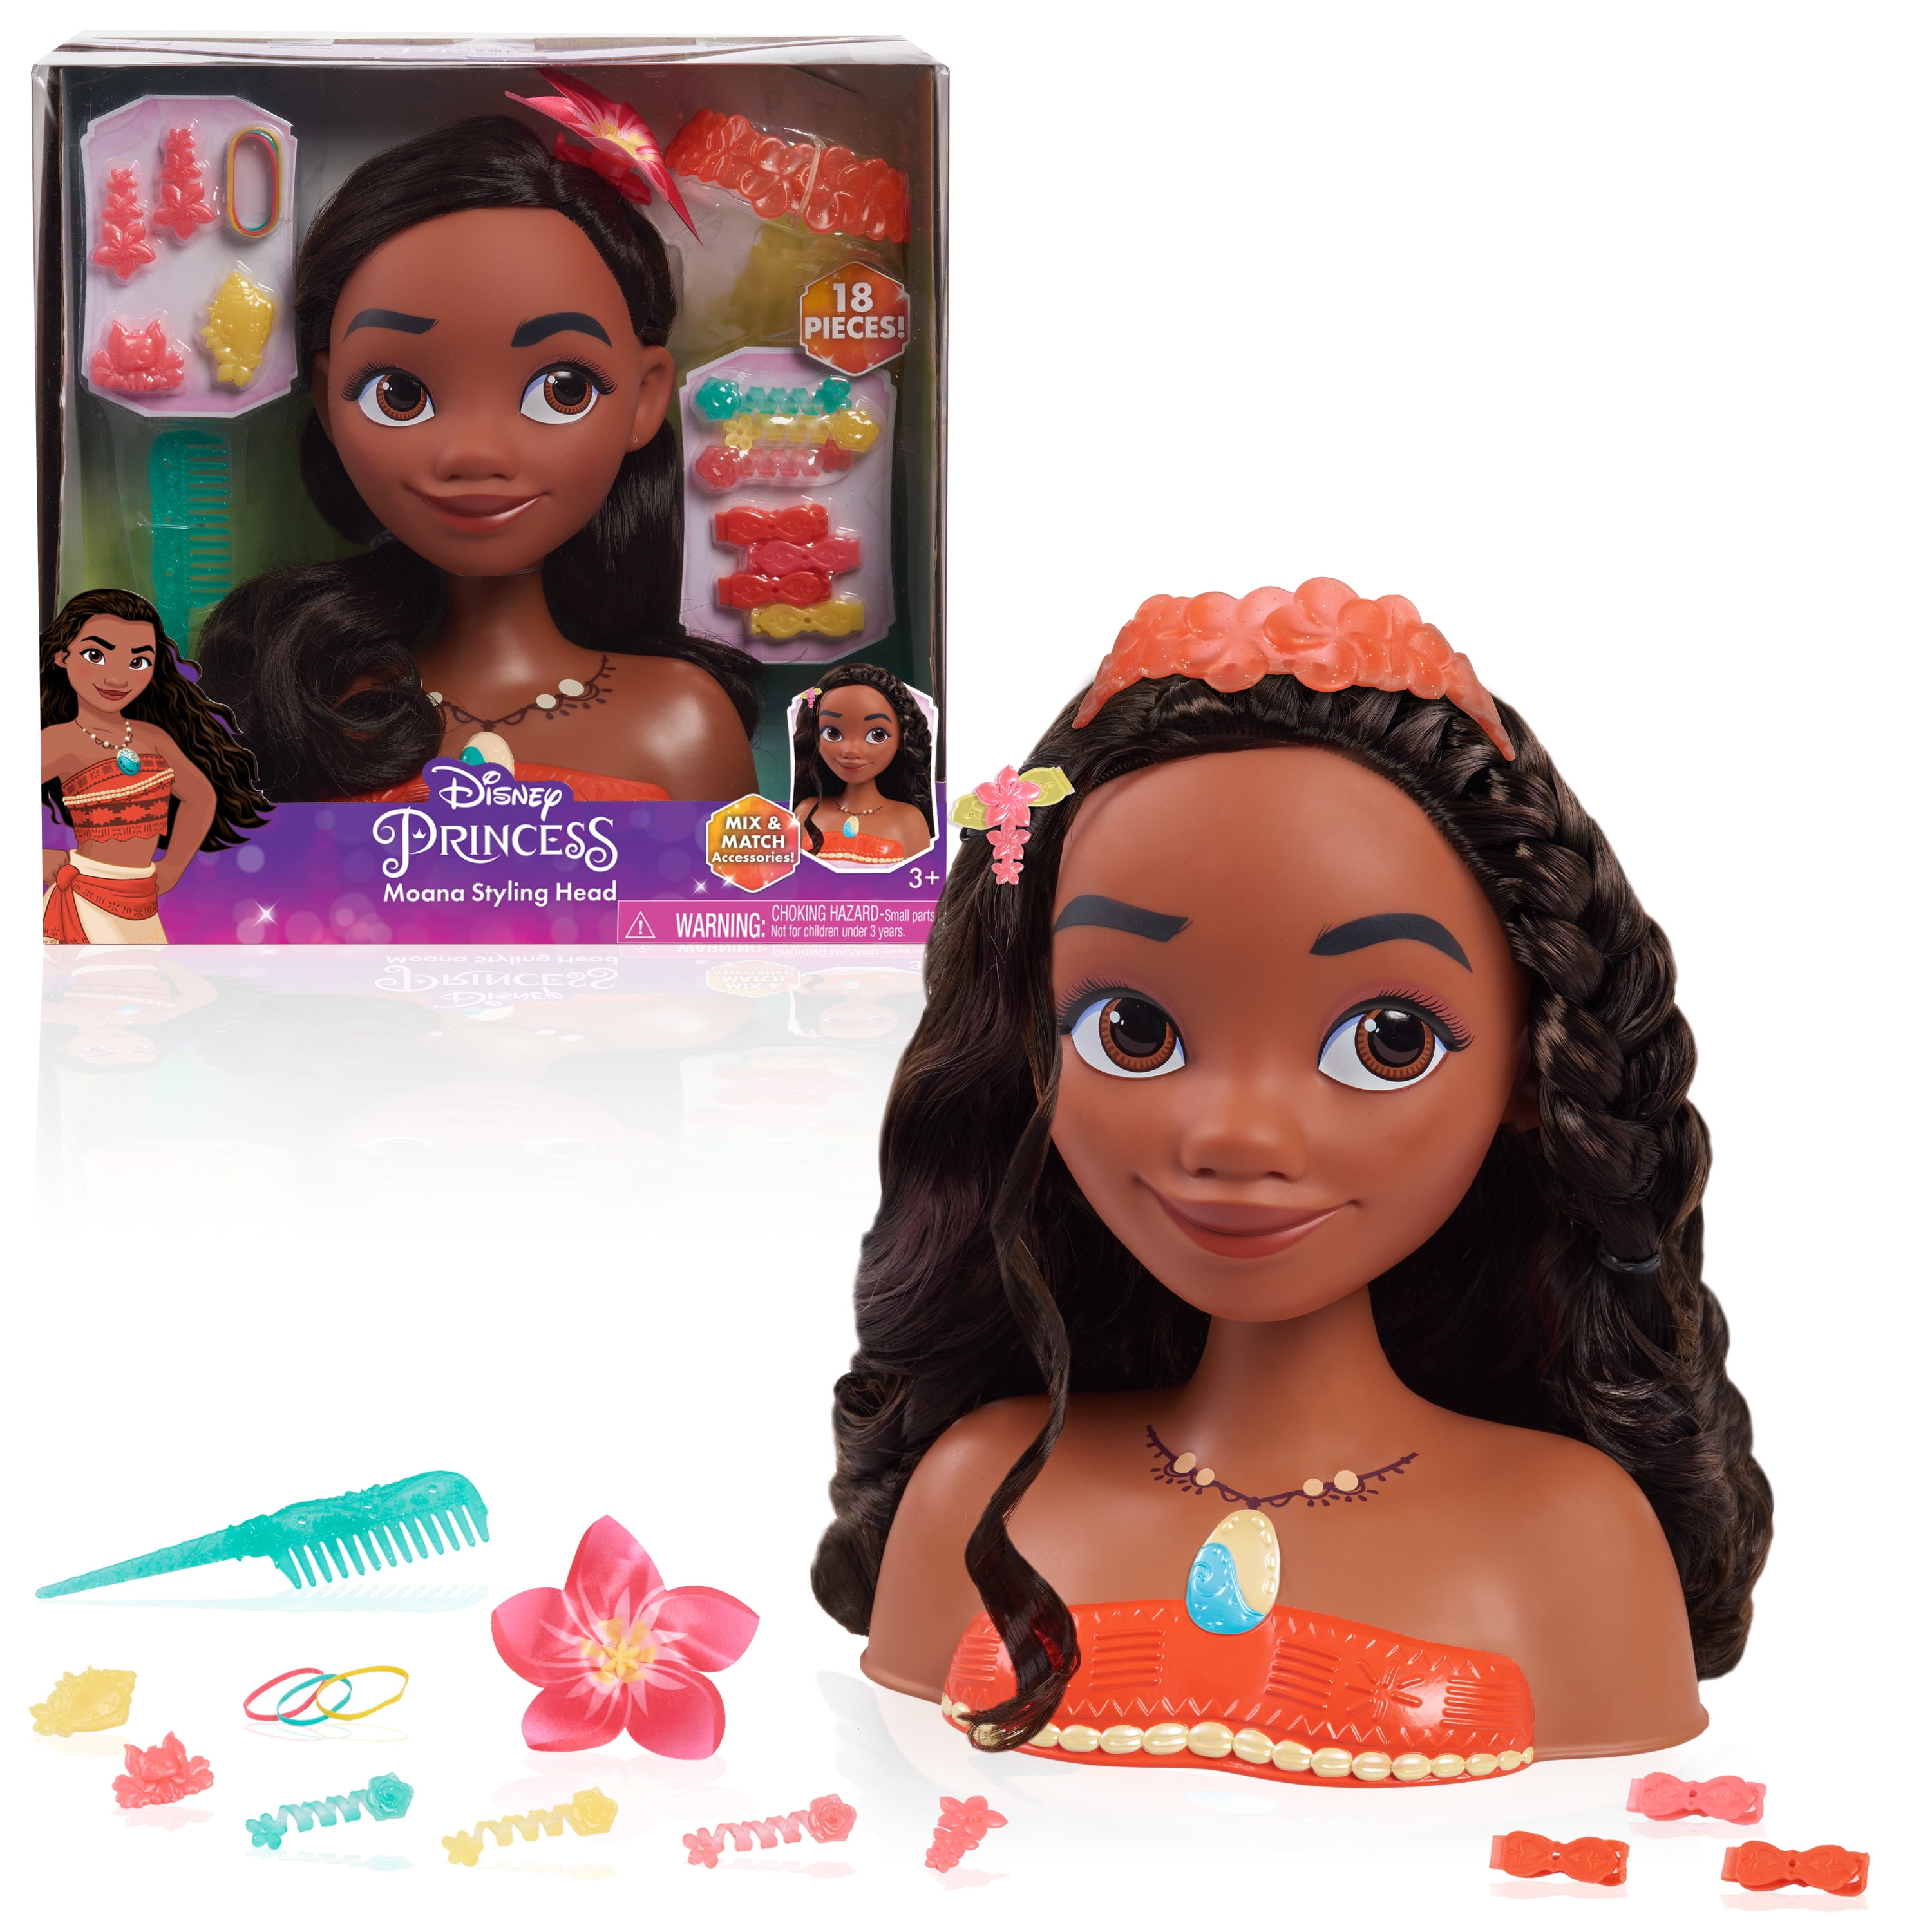 Disney Princess Moana Styling Head, 18-pieces, Pretend Play, Kids Toys for  Ages 3 up